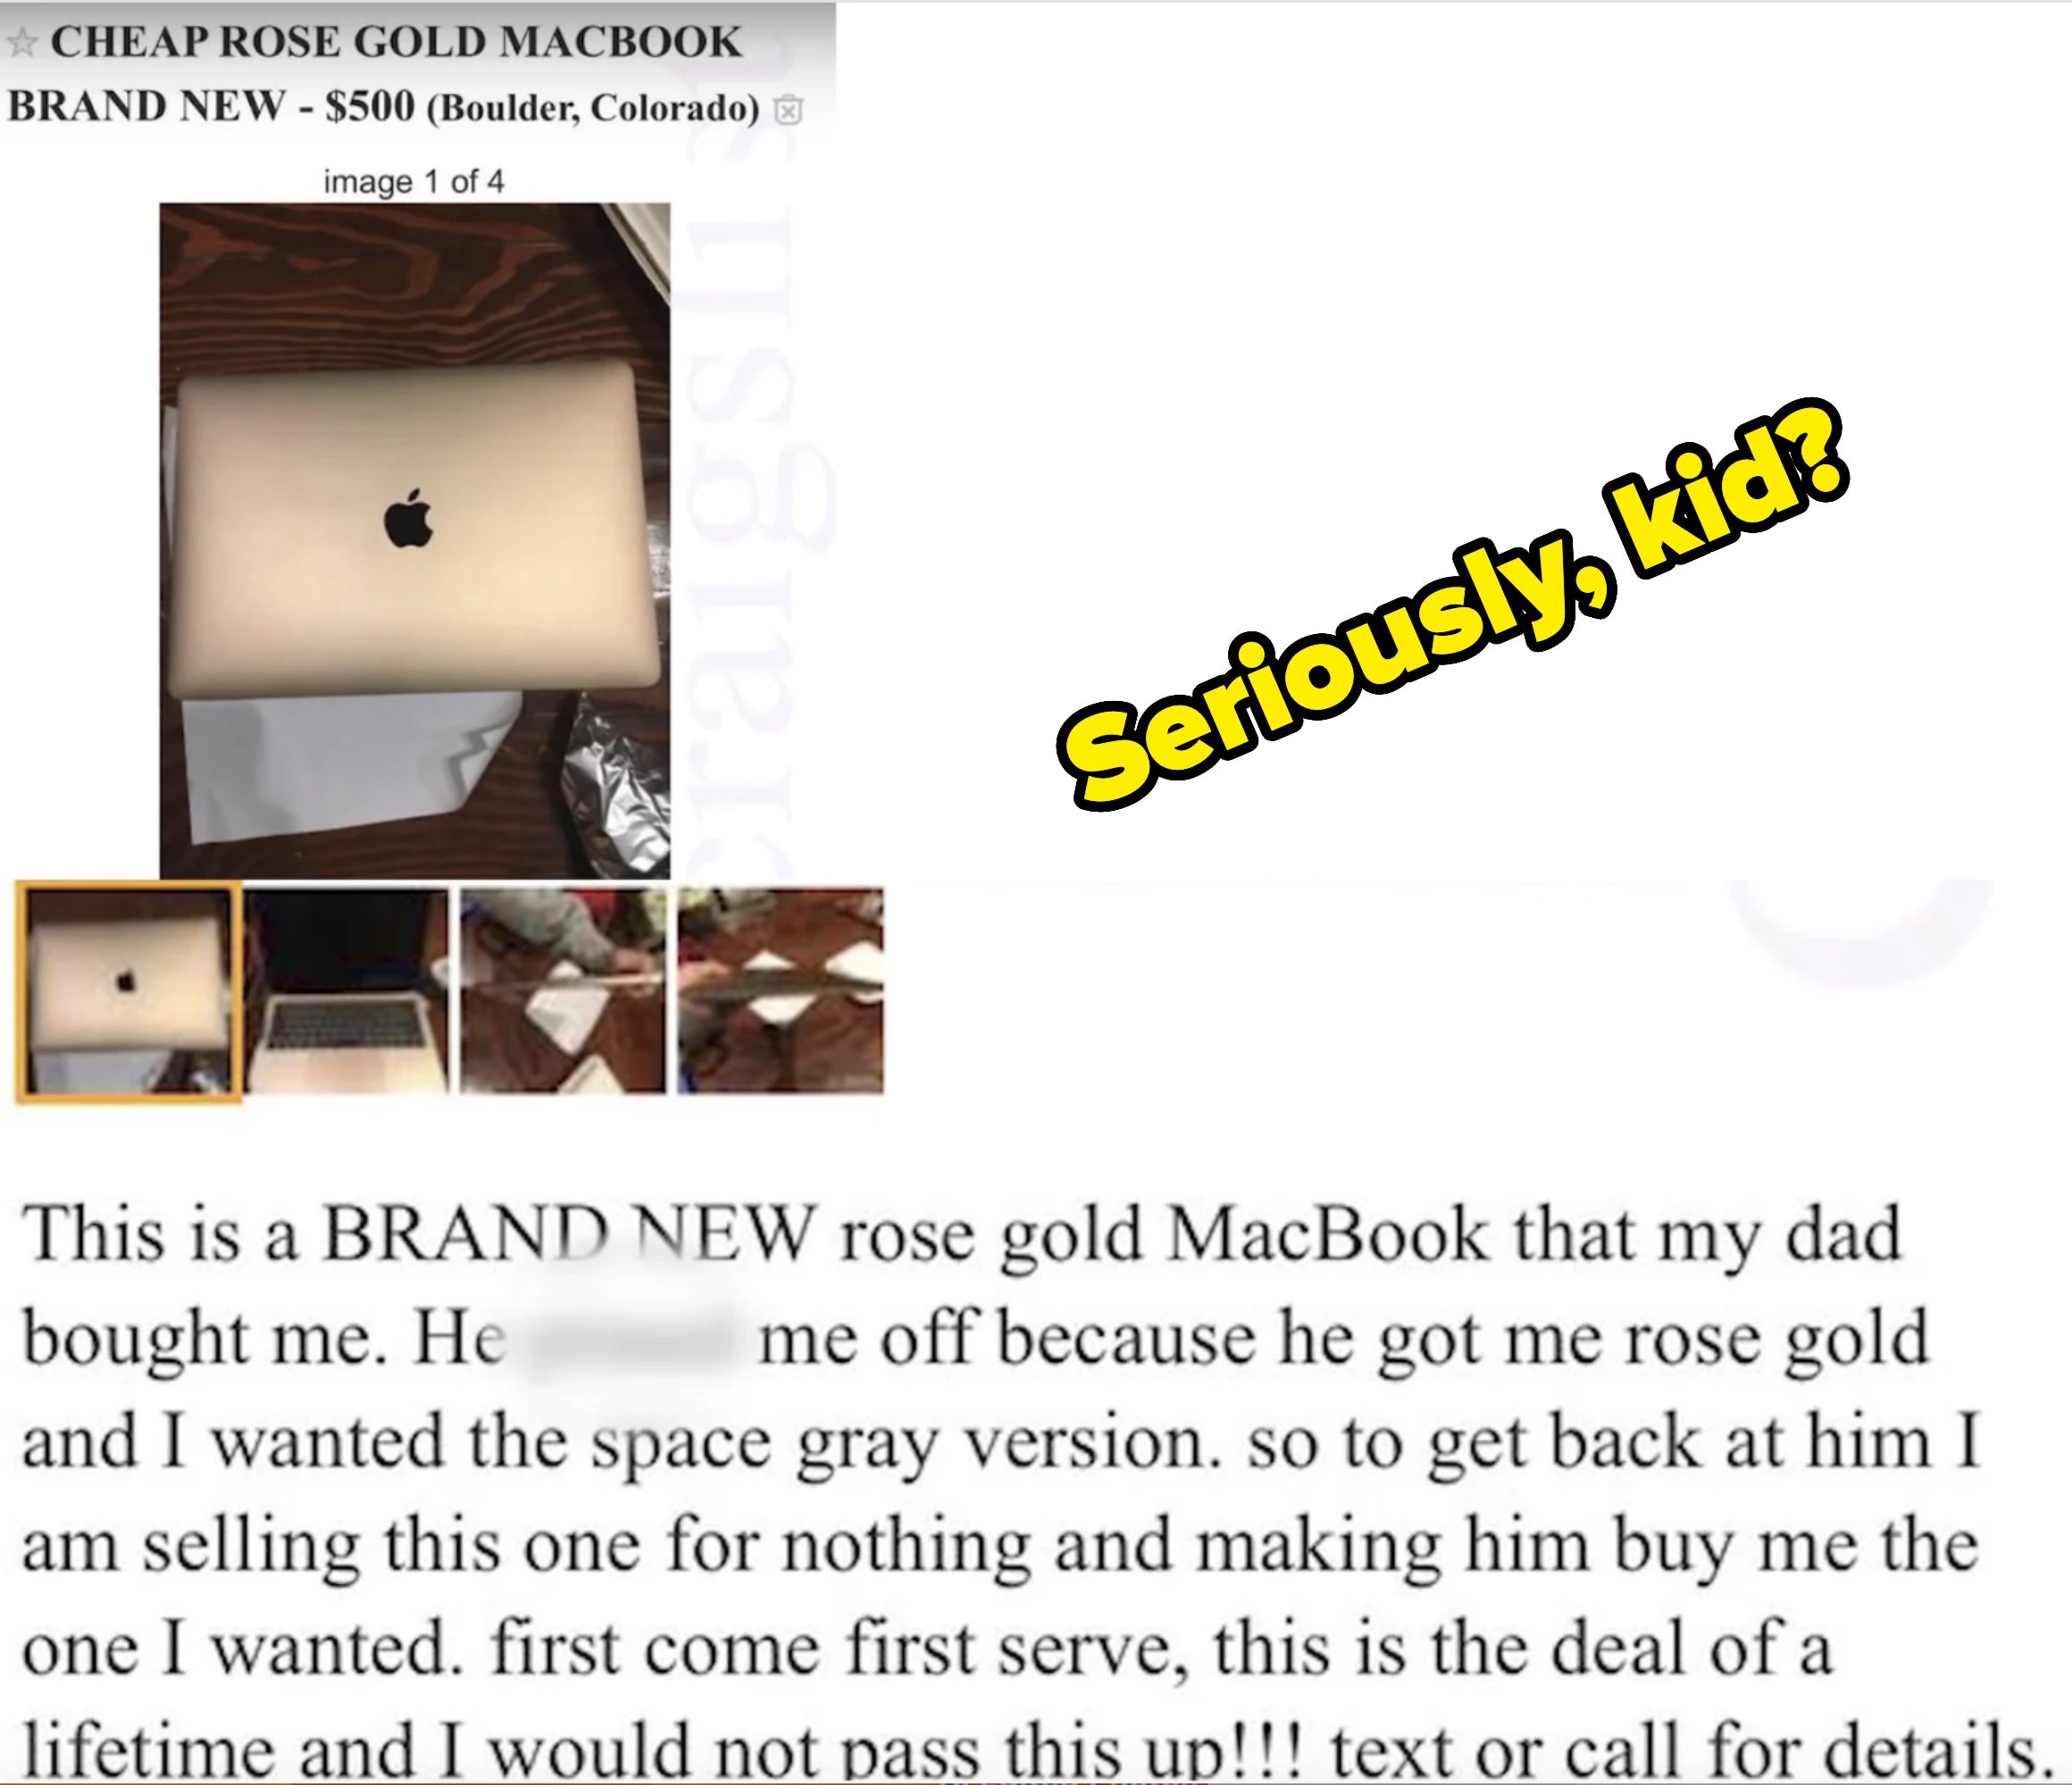 Classified ad with photos showing a new MacBook for sale by an individual disappointed with the color received as a gift